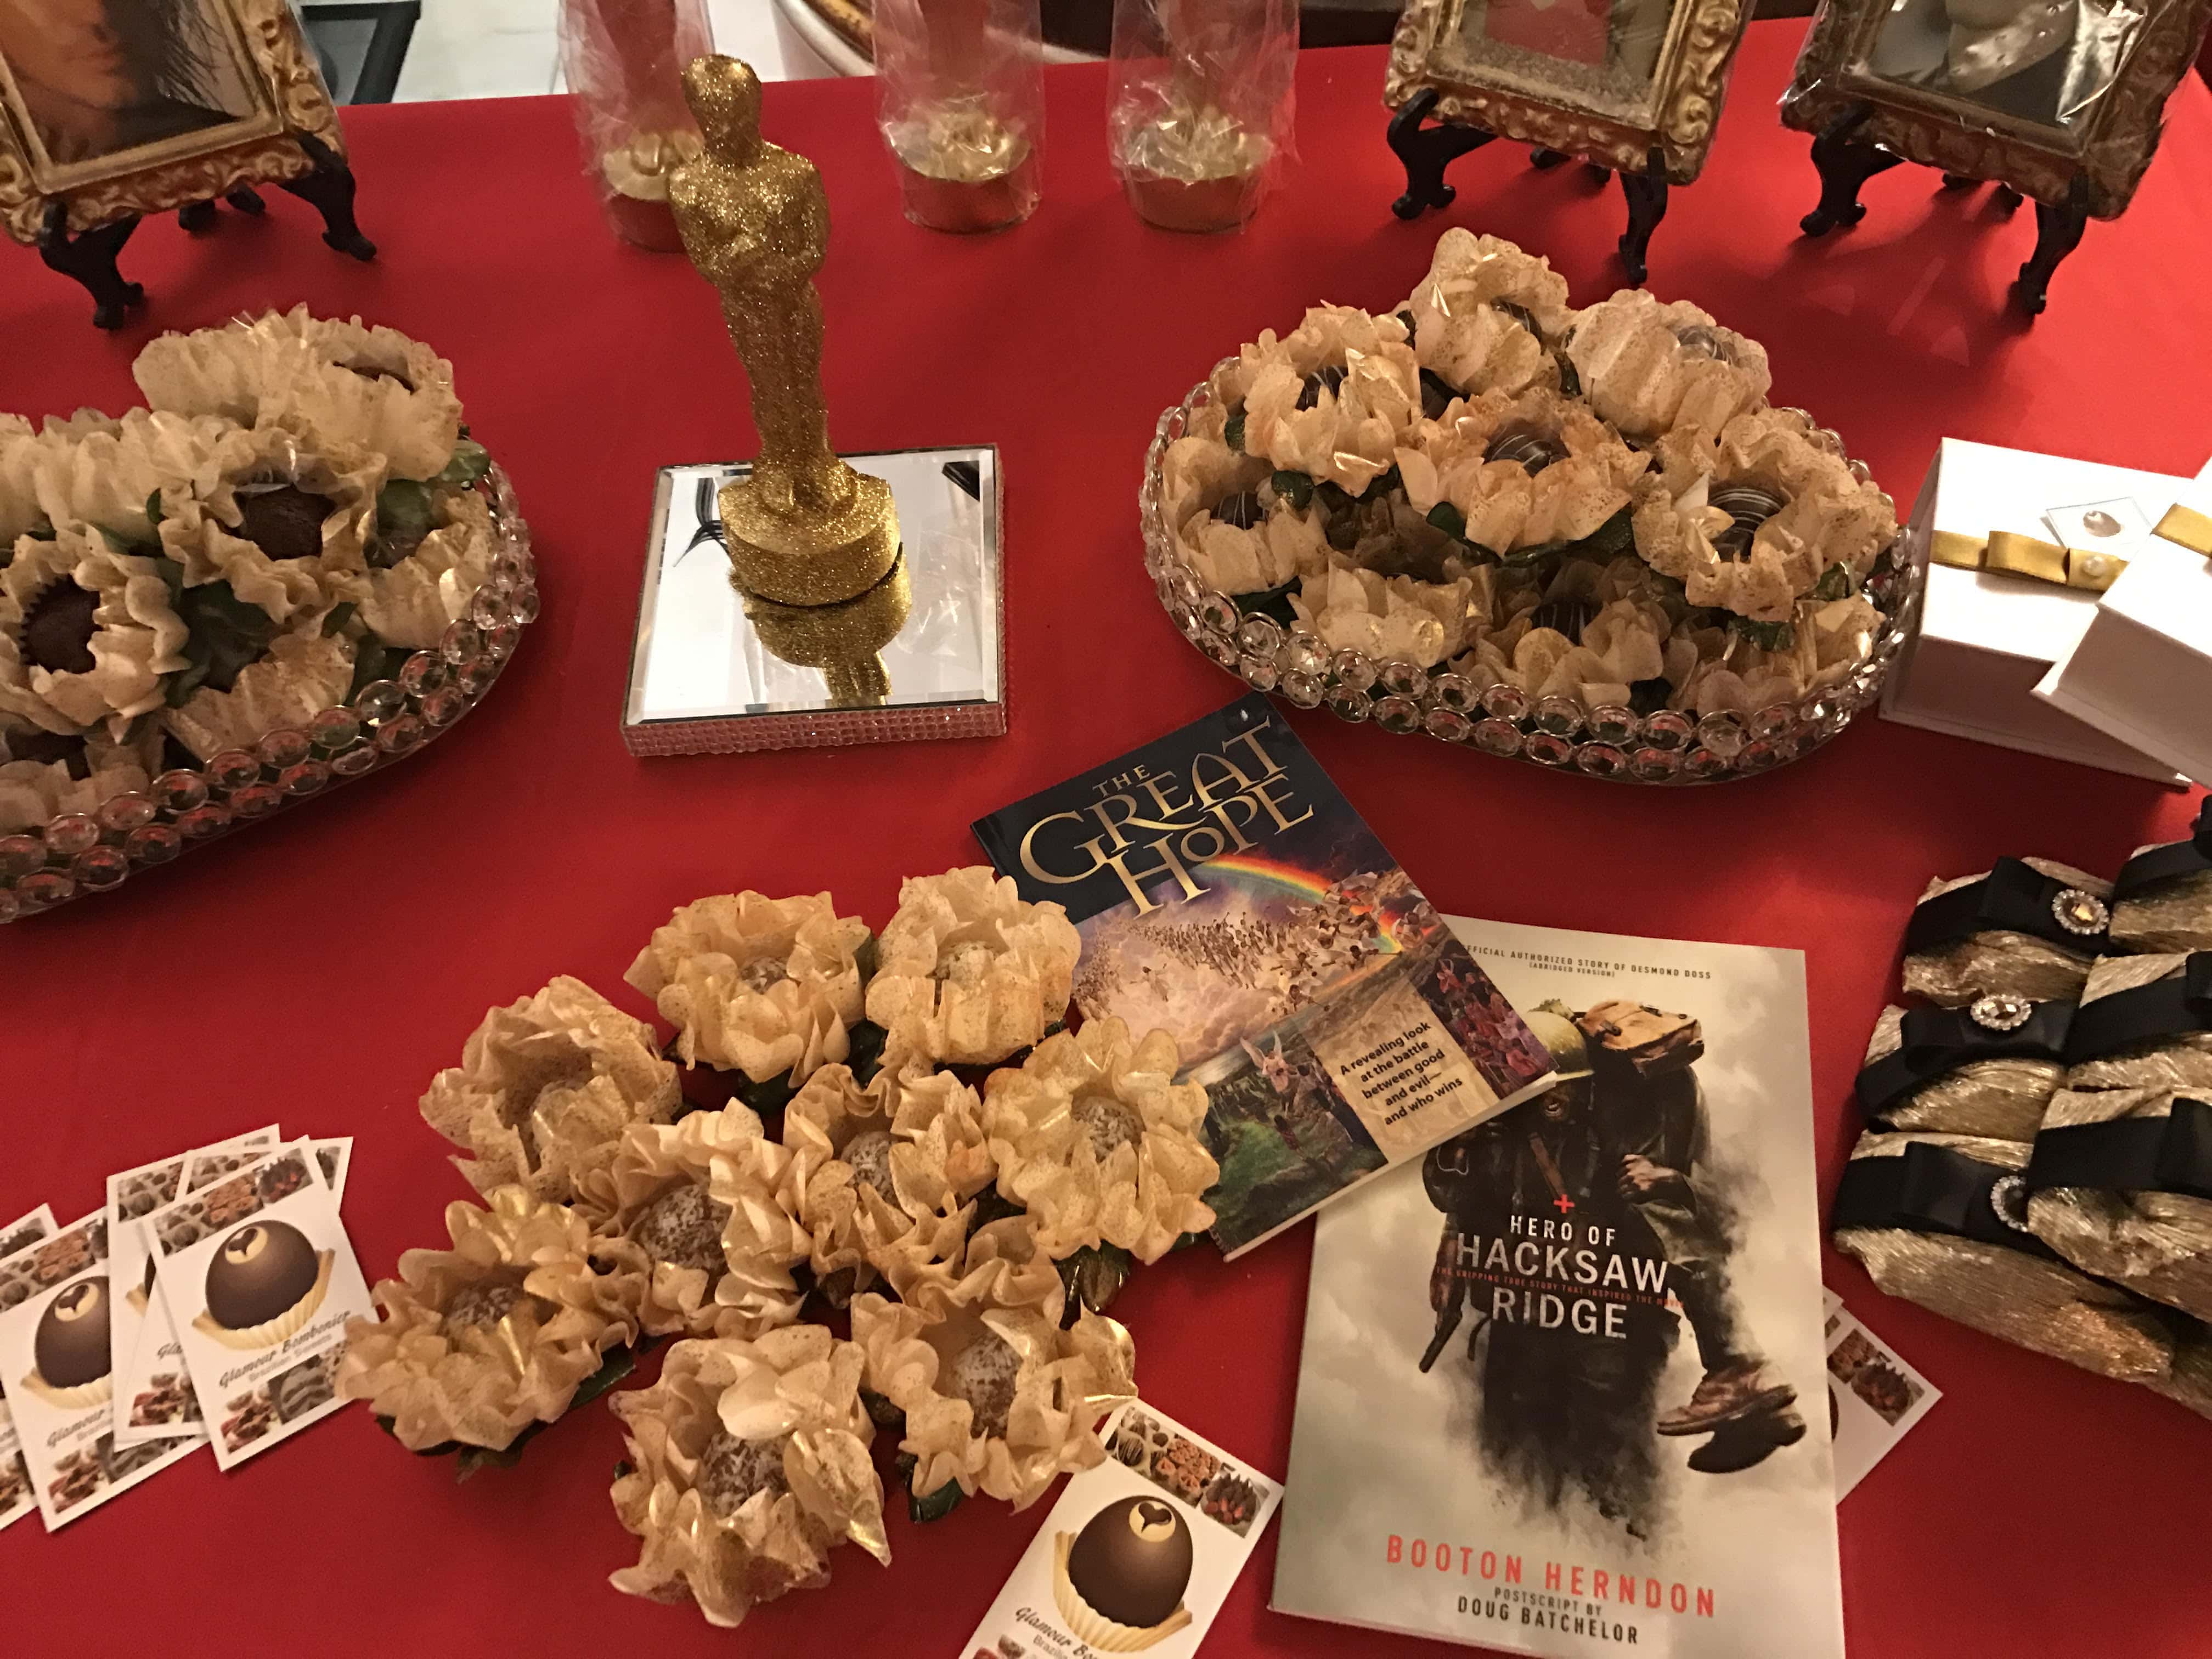 A table arrangement featuring some of the Glamour Bombonier chocolate company products, owned by Seventh-day Adventist businesswoman Rayanne Sabará Rodrigues. [Photo by Rayanne Sabará Rodrigues]